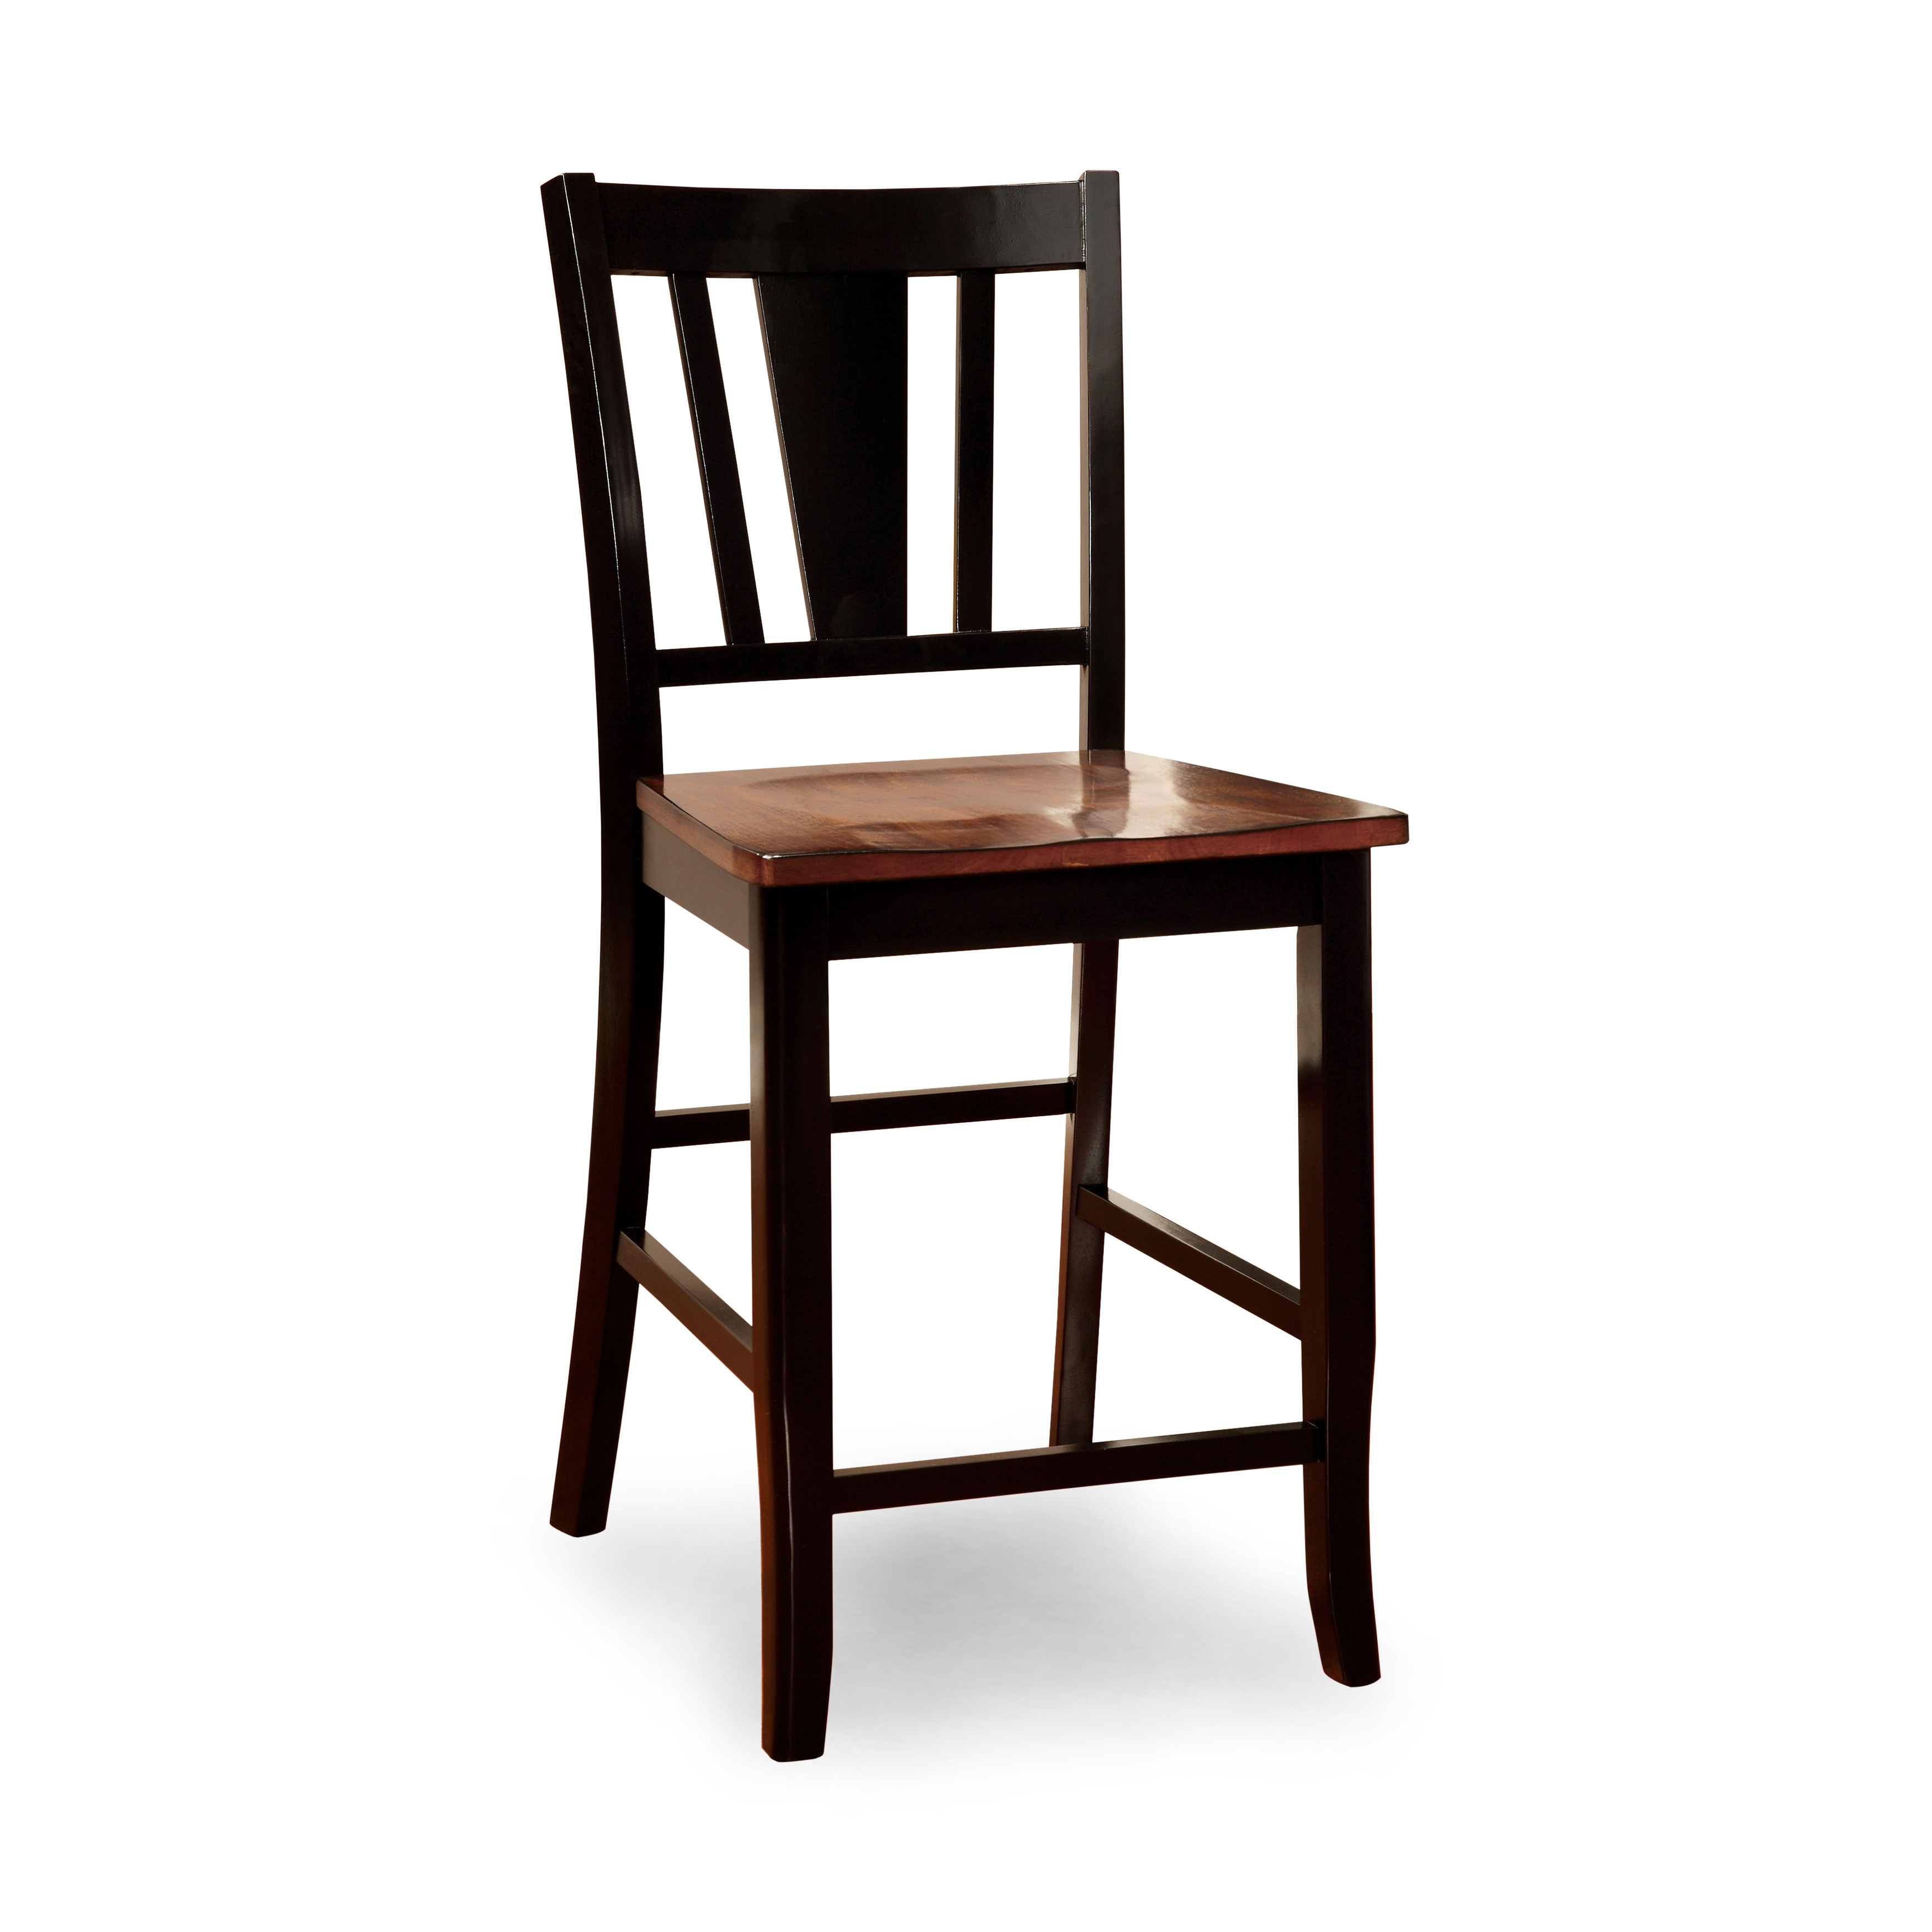 Furniture of America Perry Country Style 22.75-Inch Counter Height Chair (Set of 2)